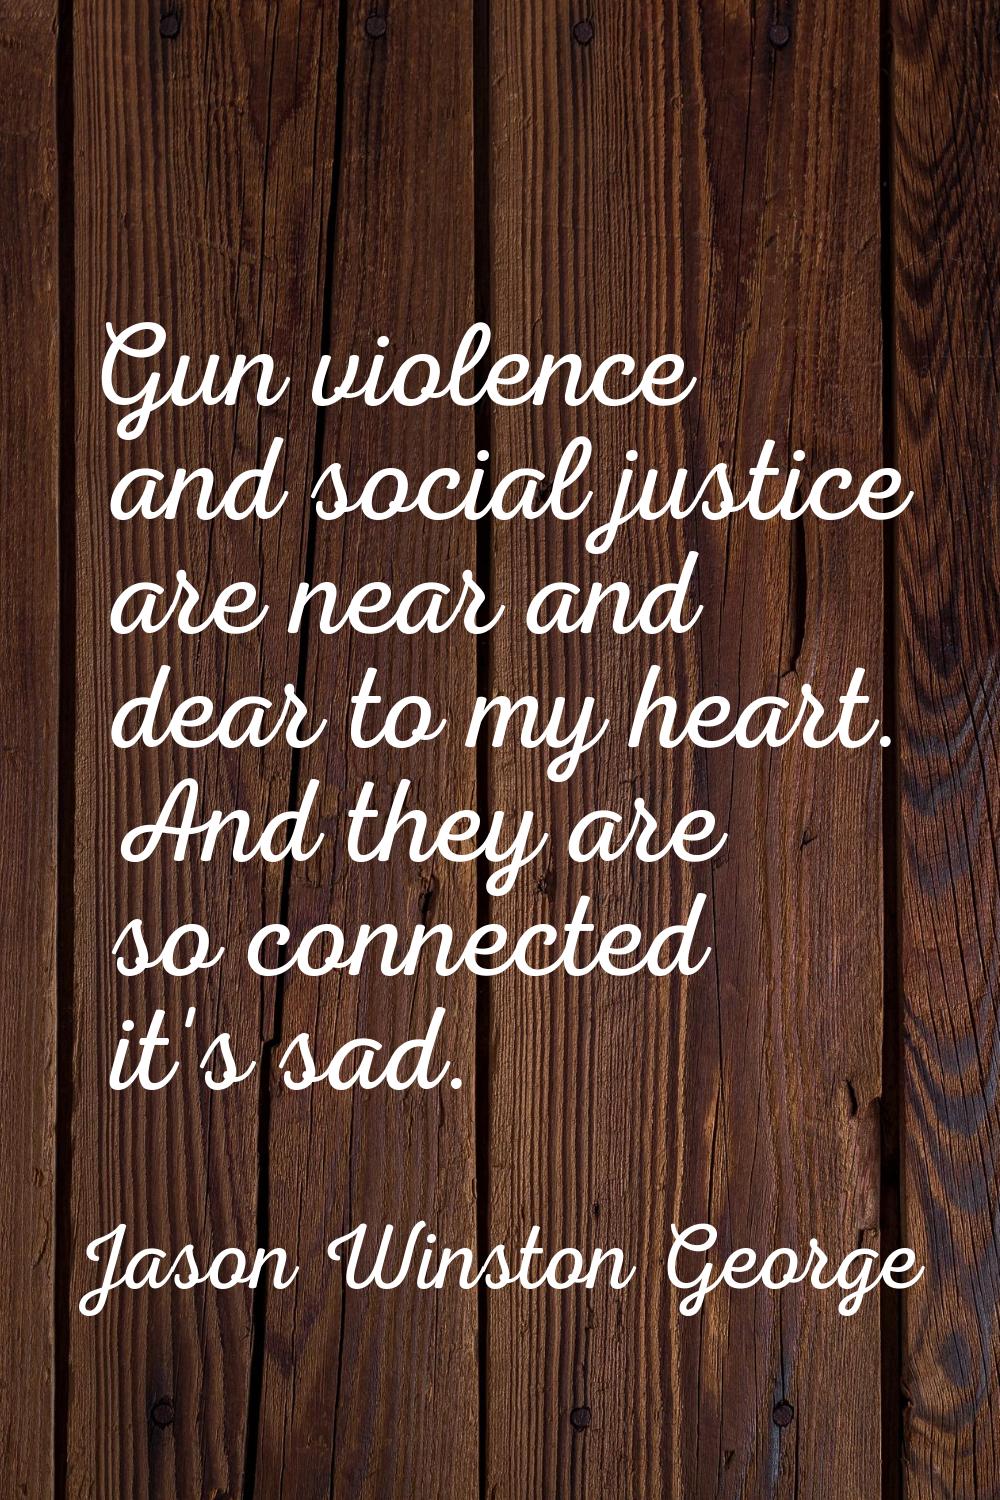 Gun violence and social justice are near and dear to my heart. And they are so connected it's sad.